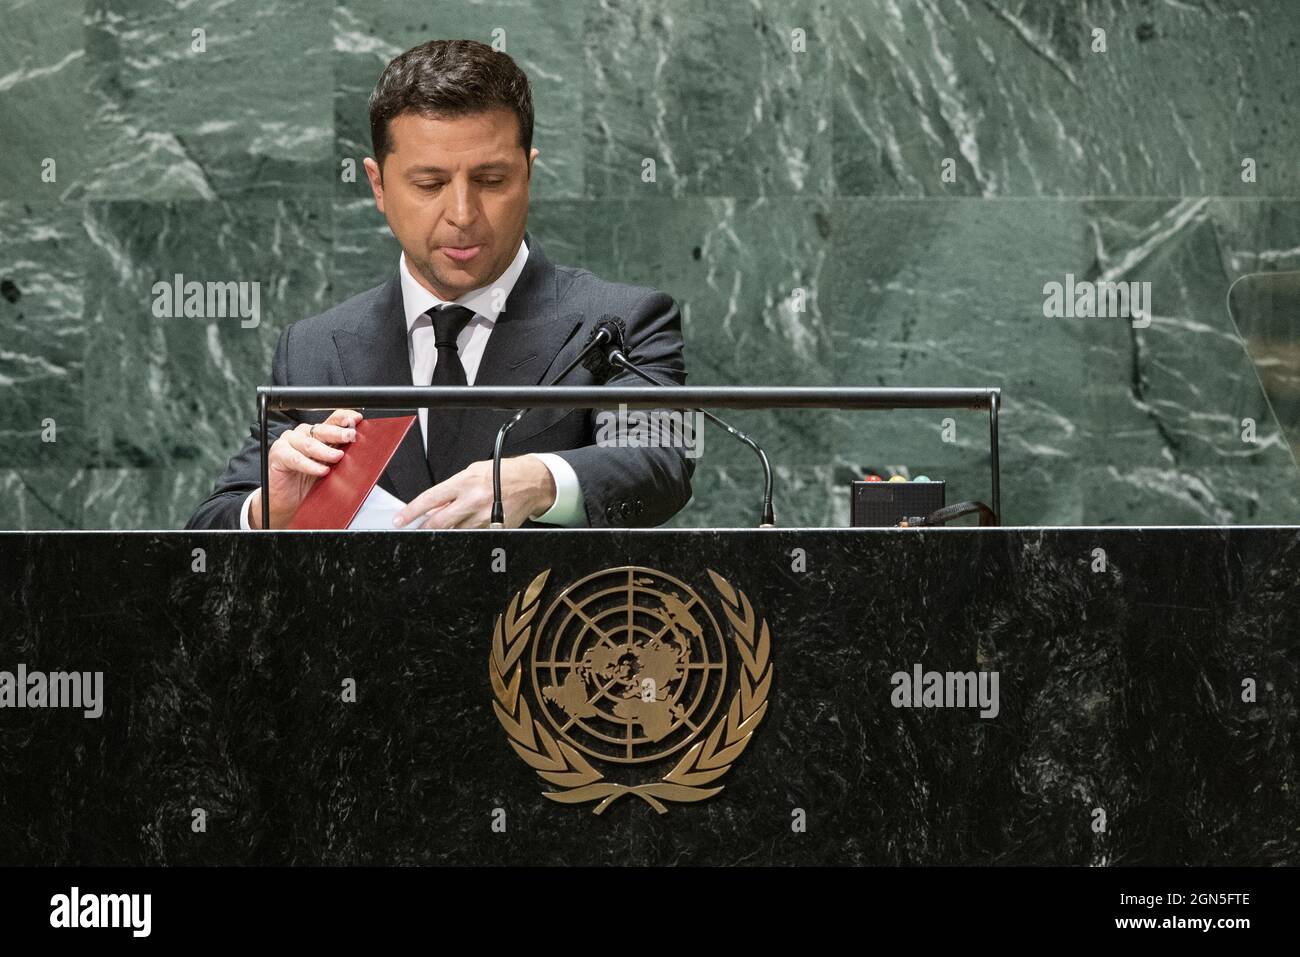 New York, United States. 22nd Sep, 2021. Ukraine's President Volodymyr Zelenskiy gets ready to depart after addressing the UN General Assembly 76th session General Debate in UN General Assembly Hall at the United Nations Headquarters on Wednesday, September 22, 2021 in New York City. Pool Photo by Eduardo Munoz/UPI Credit: UPI/Alamy Live News Stock Photo